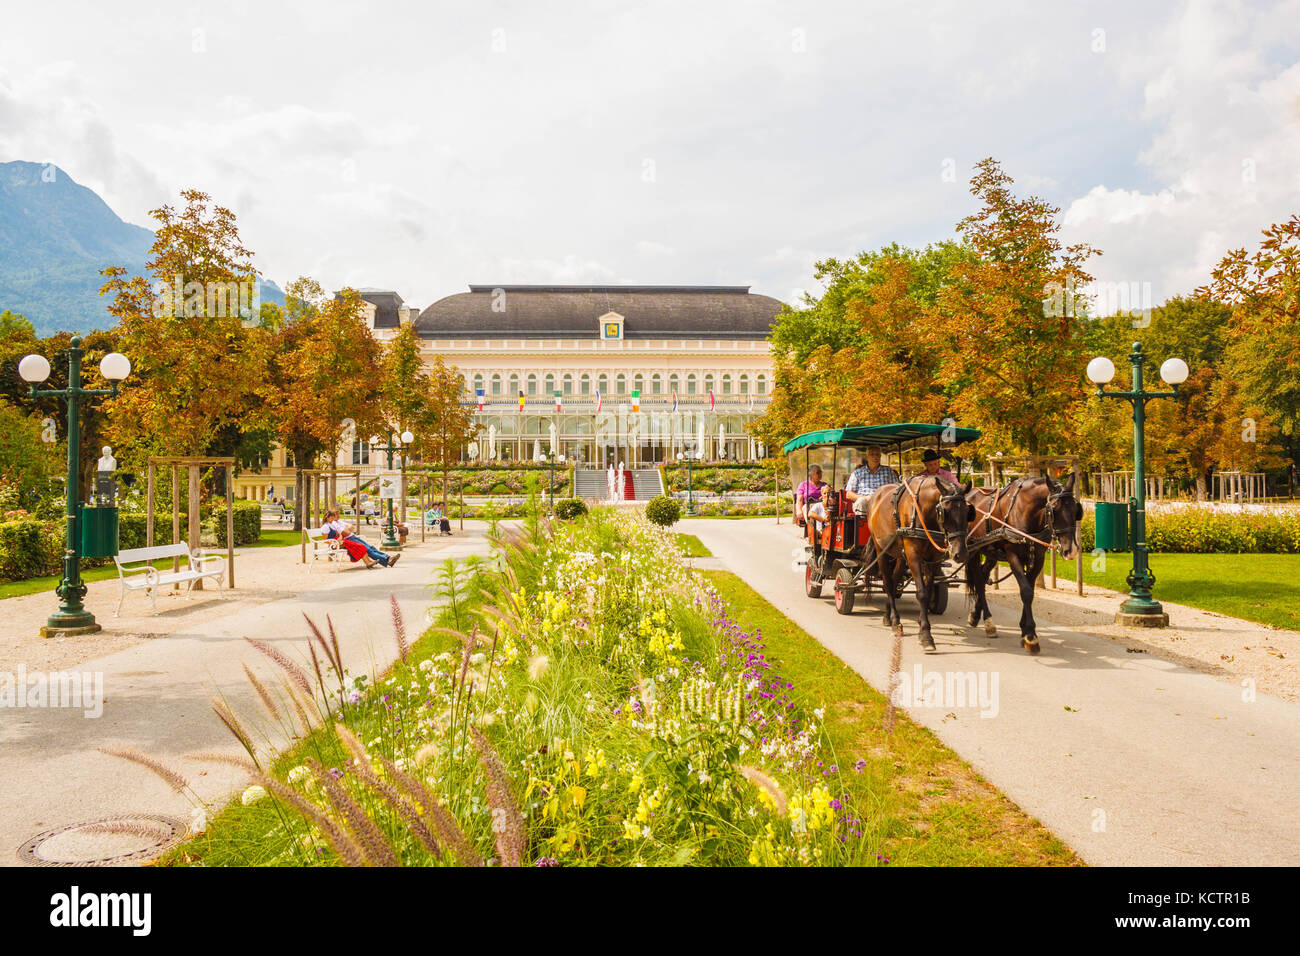 Bad Ischl, Austria - September 2, 2016: A horse-drawn carriage with tourists rides through a park in front of the Congress and Theaterhouse (Kongress  Stock Photo